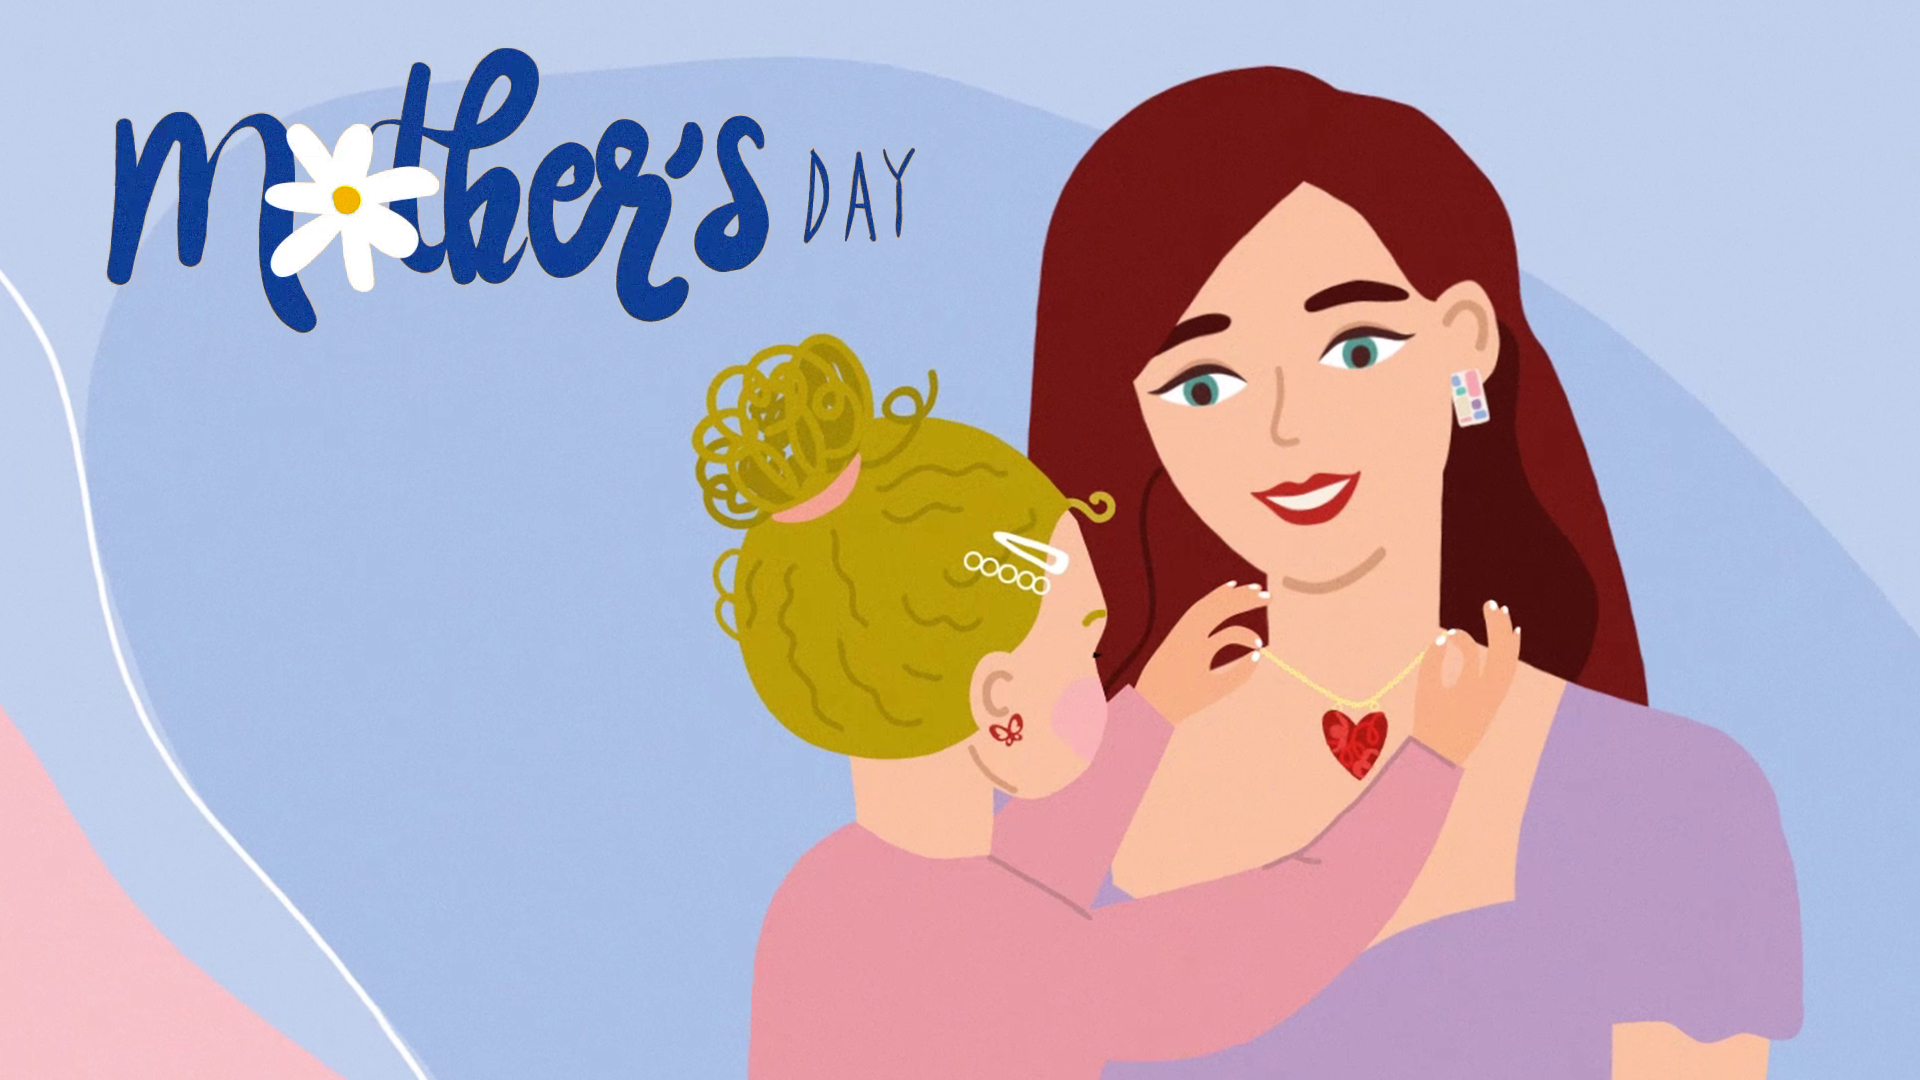 Animation for Mother's Day #mothersday